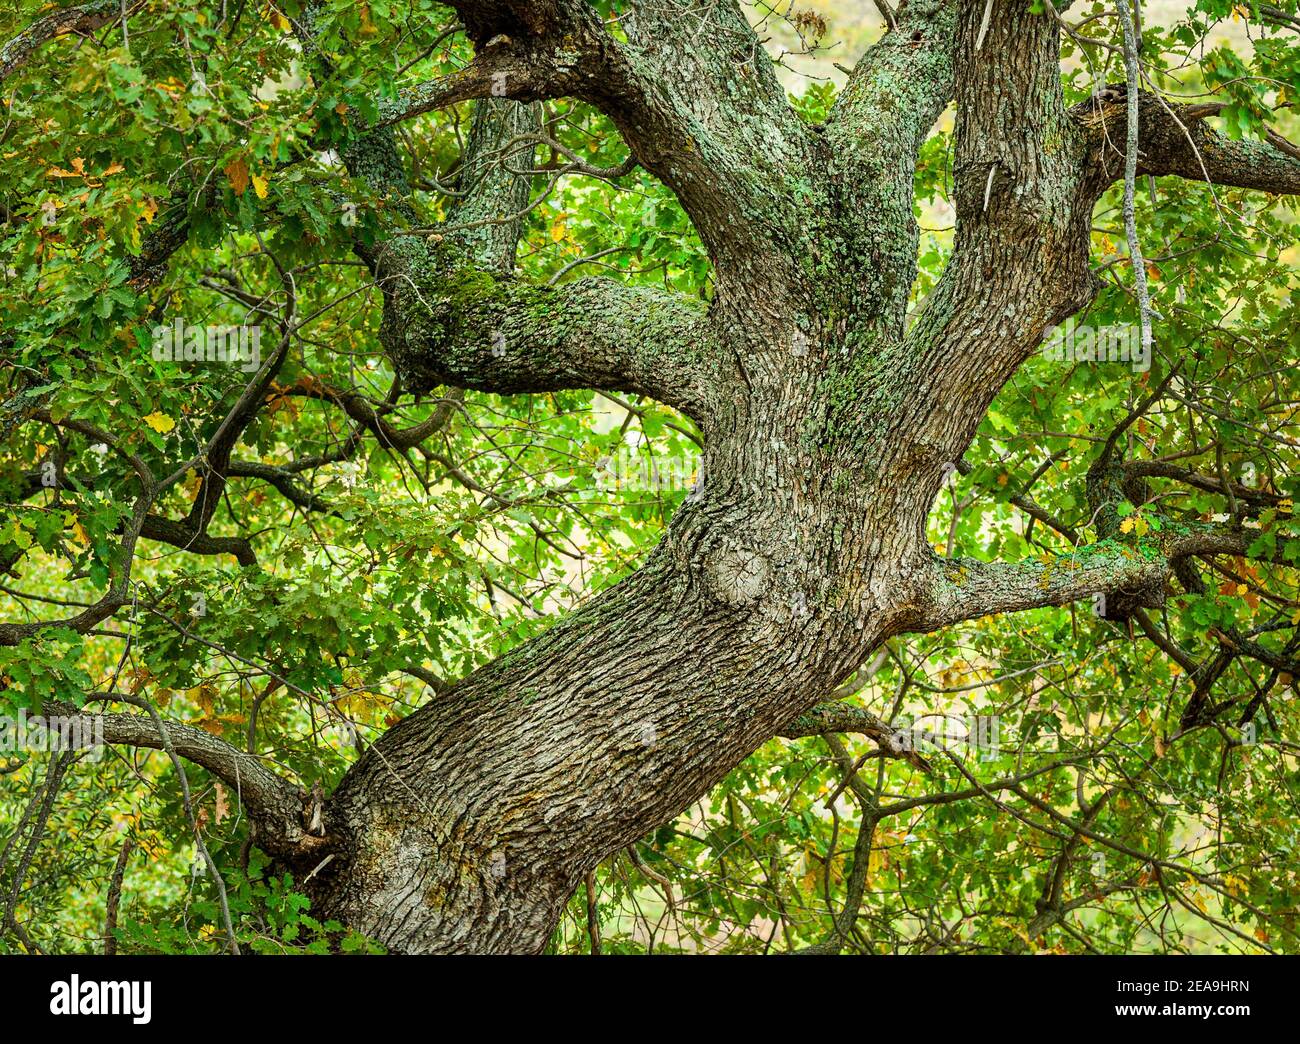 Large oak tree branch with the foliage still green Stock Photo